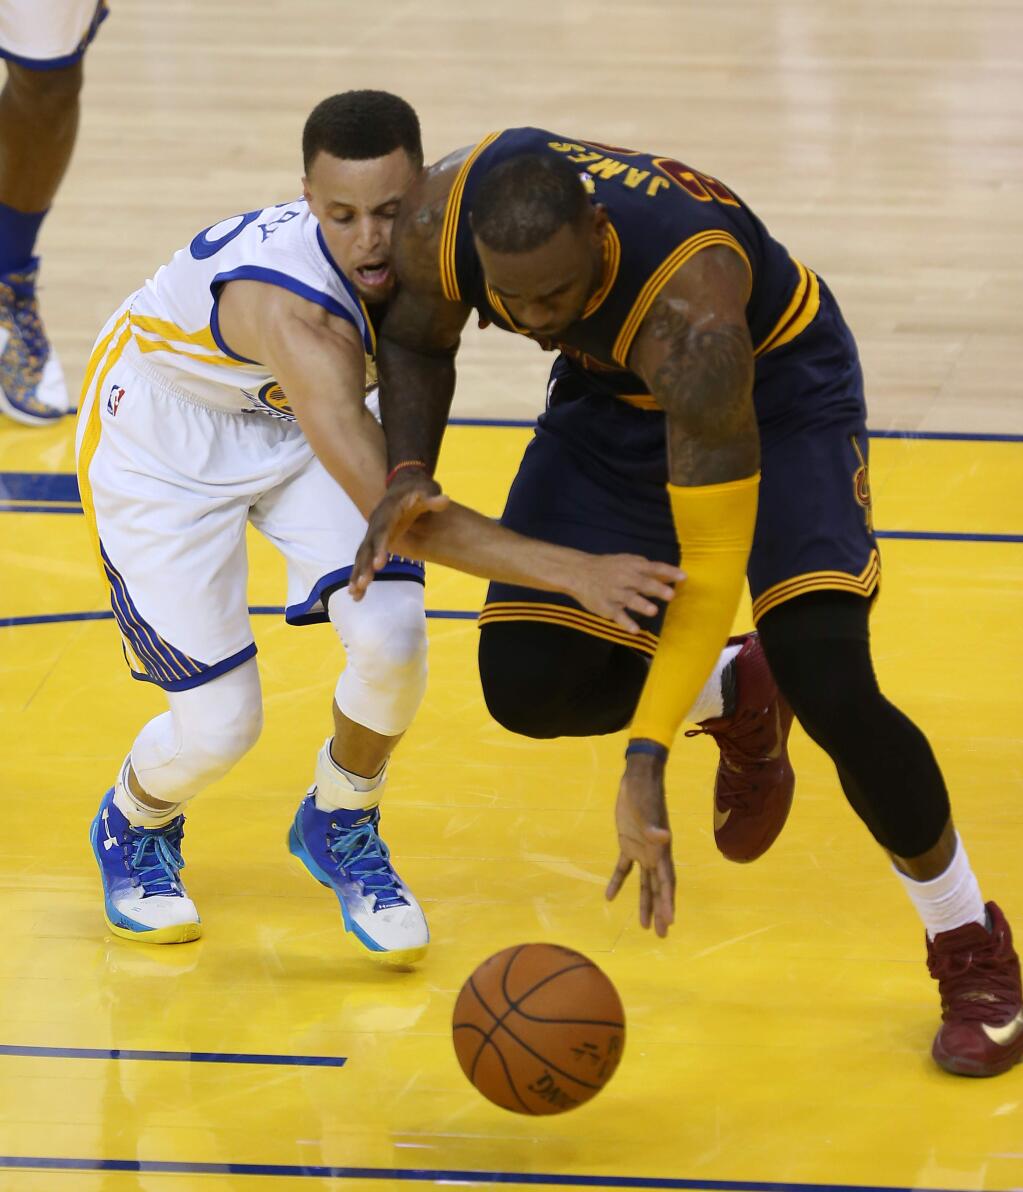 Golden State Warriors' Stephen Curry and Cleveland Cavaliers' LeBron James go after a loose ball during their game in Oakland on Thursday, June 2, 2016. (Christopher Chung / The Press Democrat)